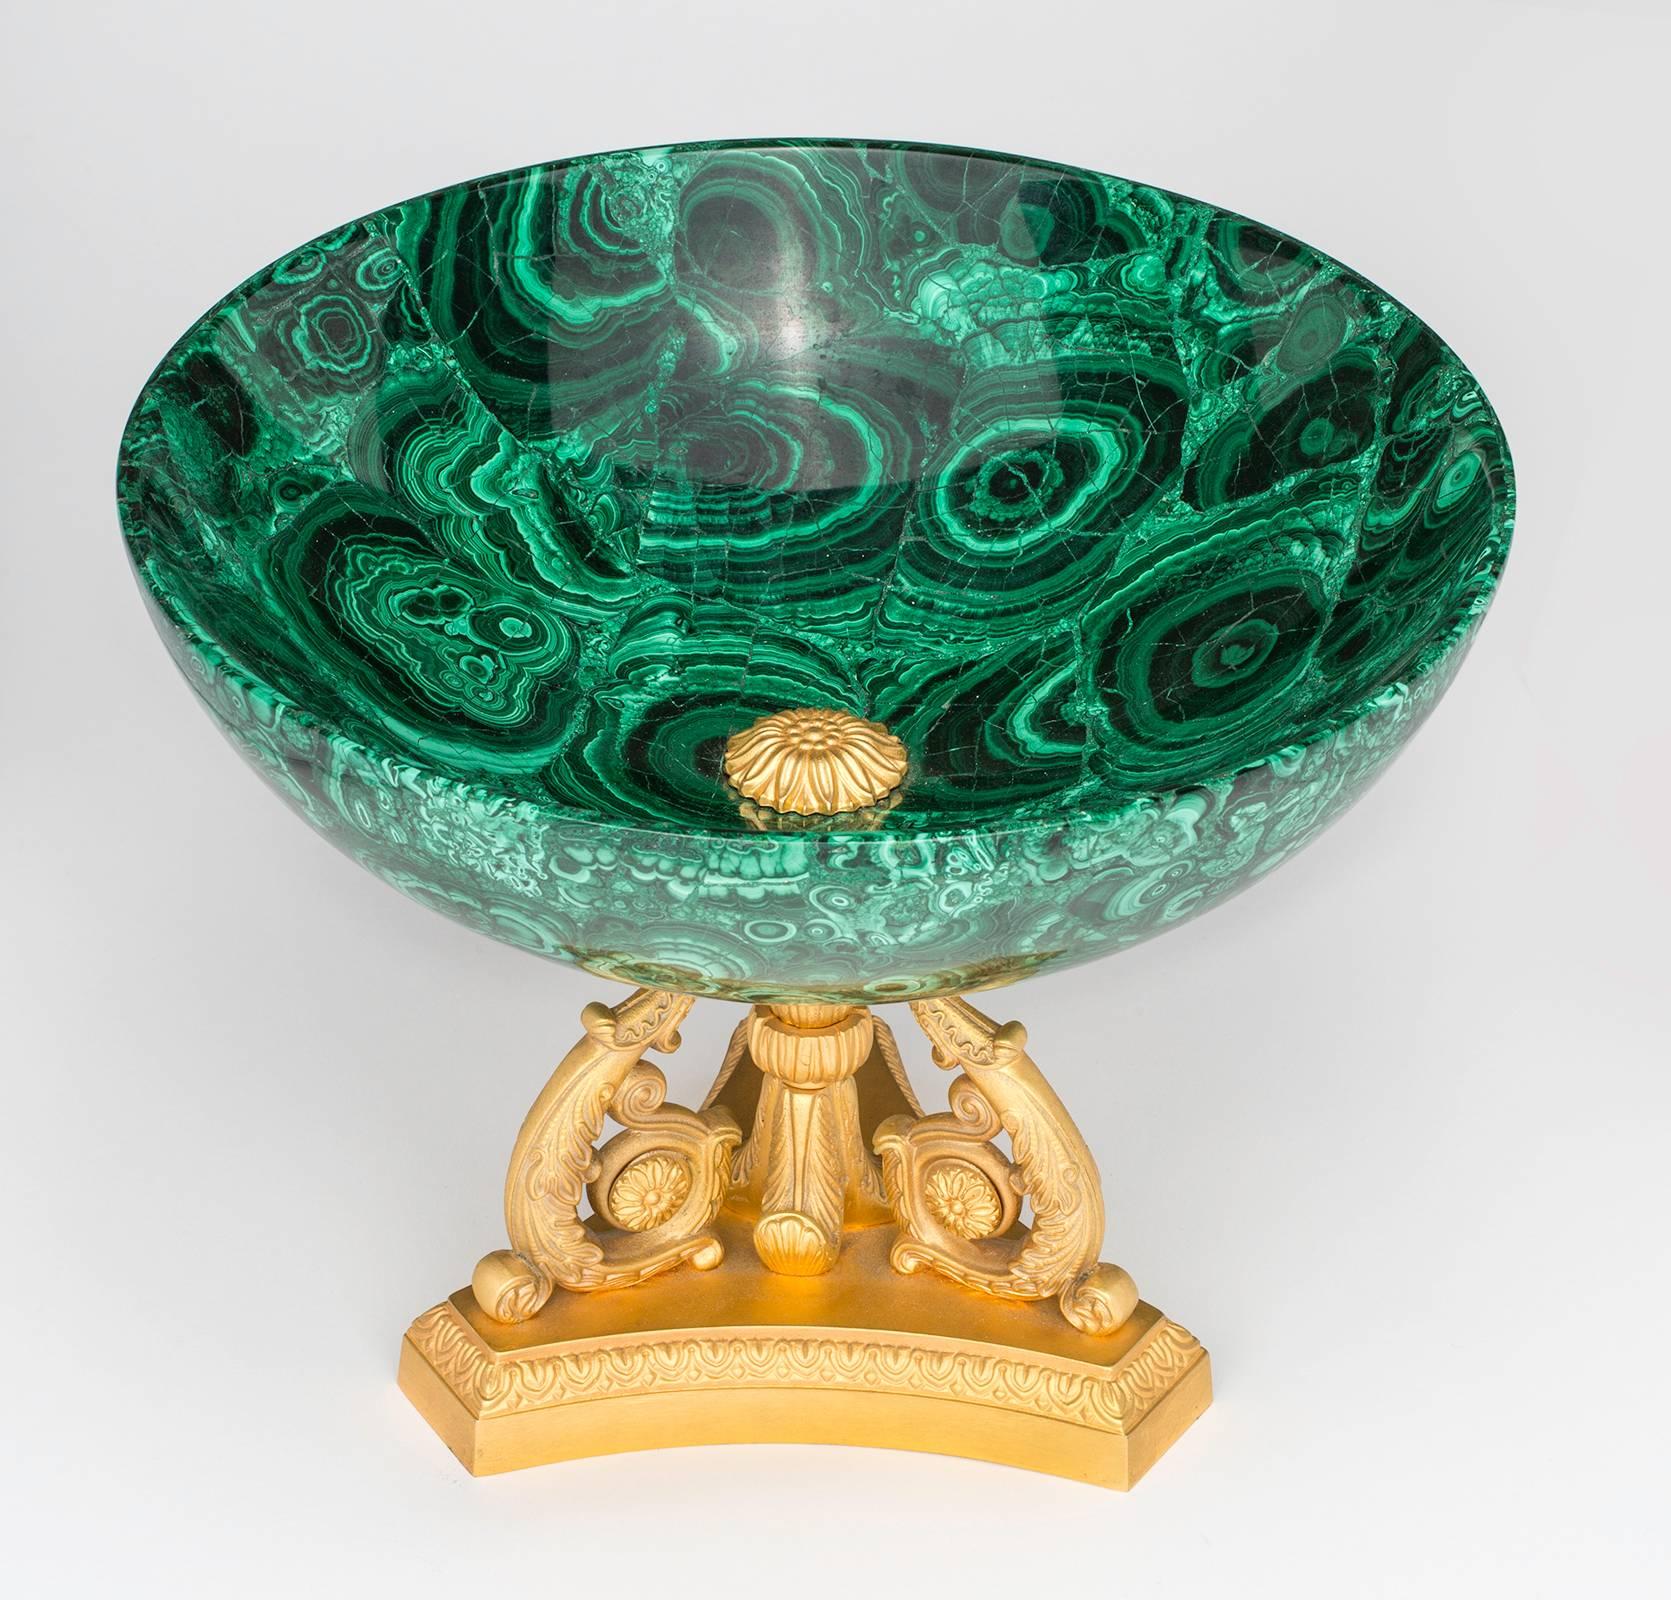 Fabulous solid Russian malachite bowl on footed triple scroll in gilt bronze doré stand. A very large dramatic piece for your table. Excellent condition.